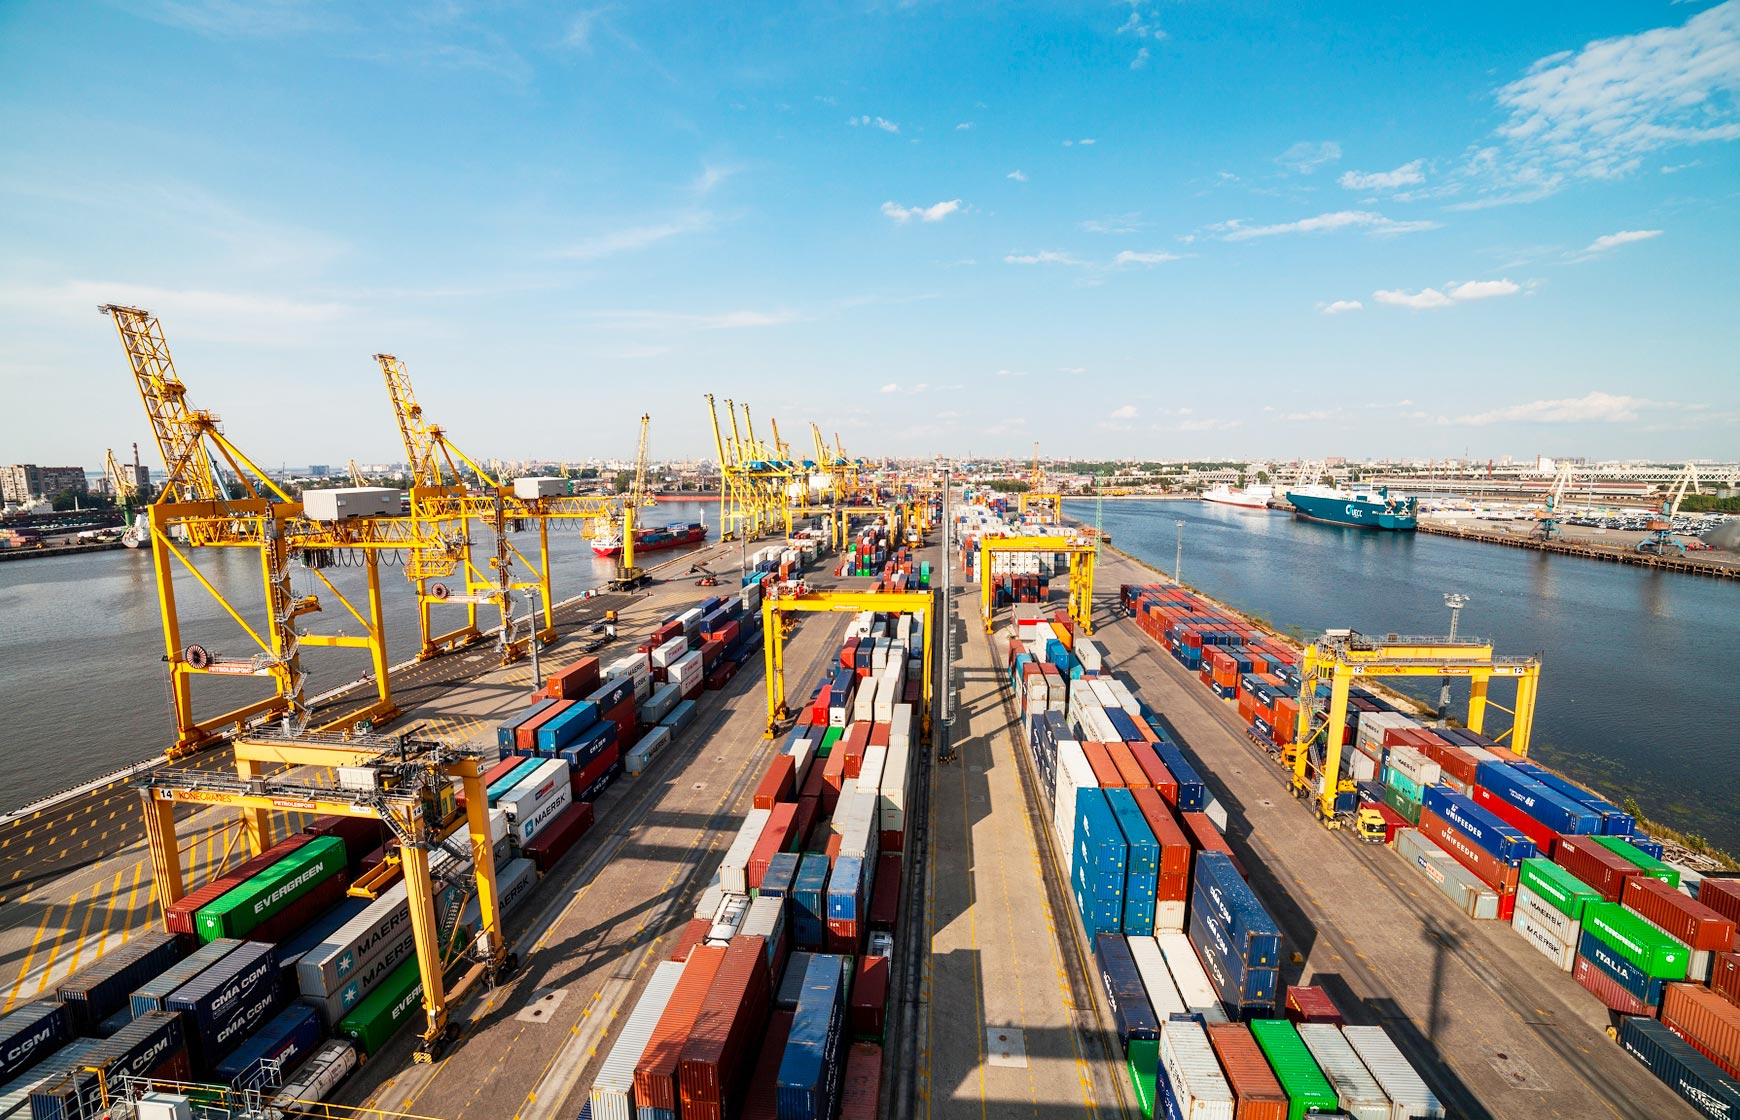 First Container Terminal (FCT) is located in the harbor of the Port of St. Petersburg